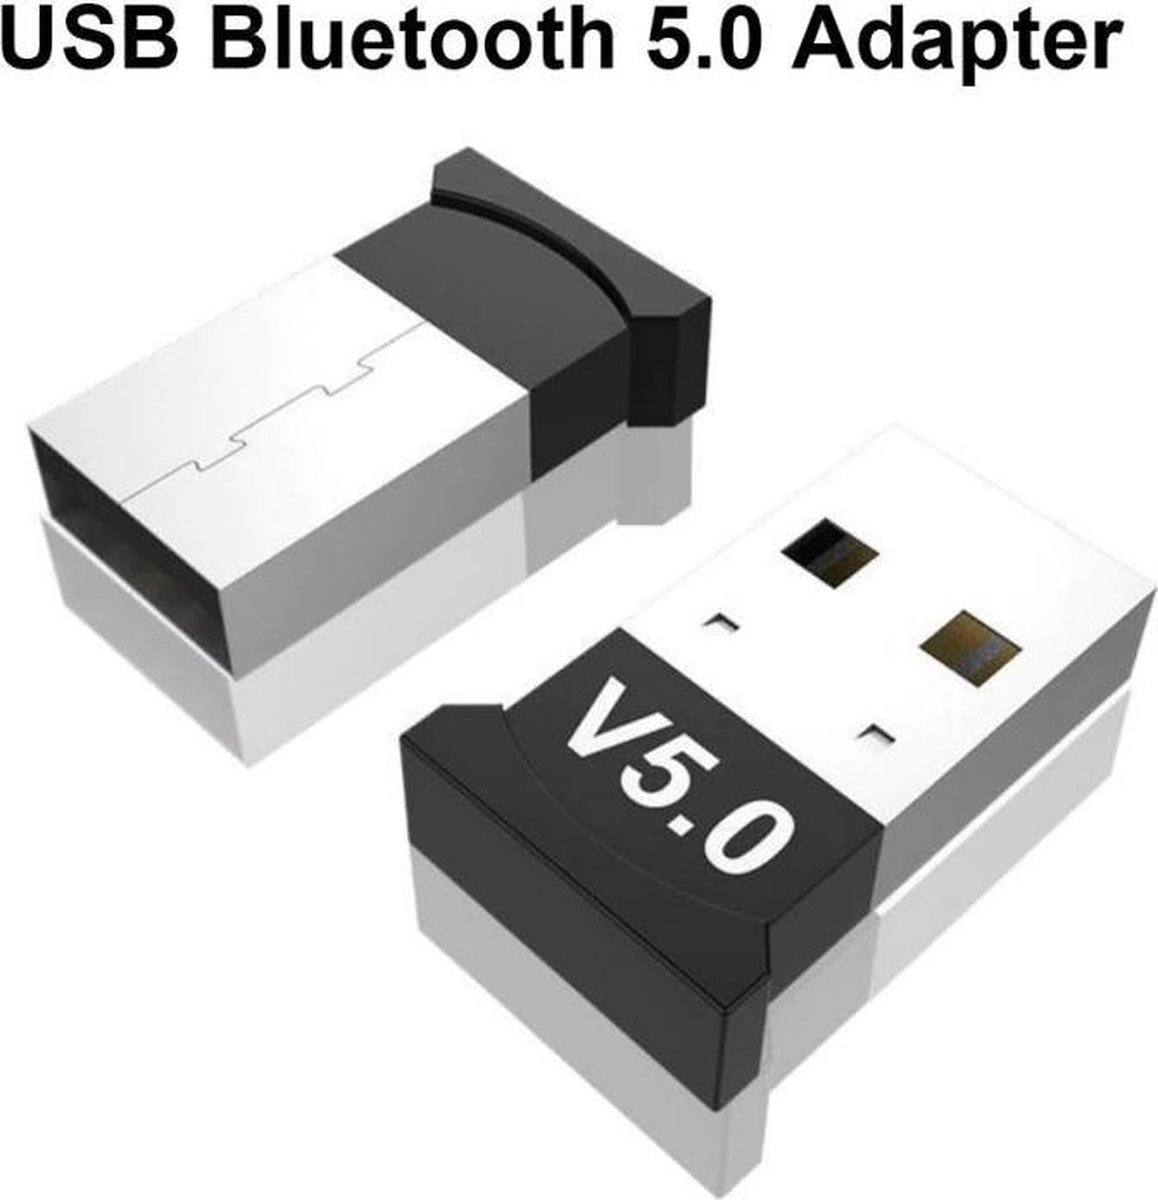 Bluetooth Adapter for PC USB Dongle CSR 4.0 ZTESY Bluetooth driver